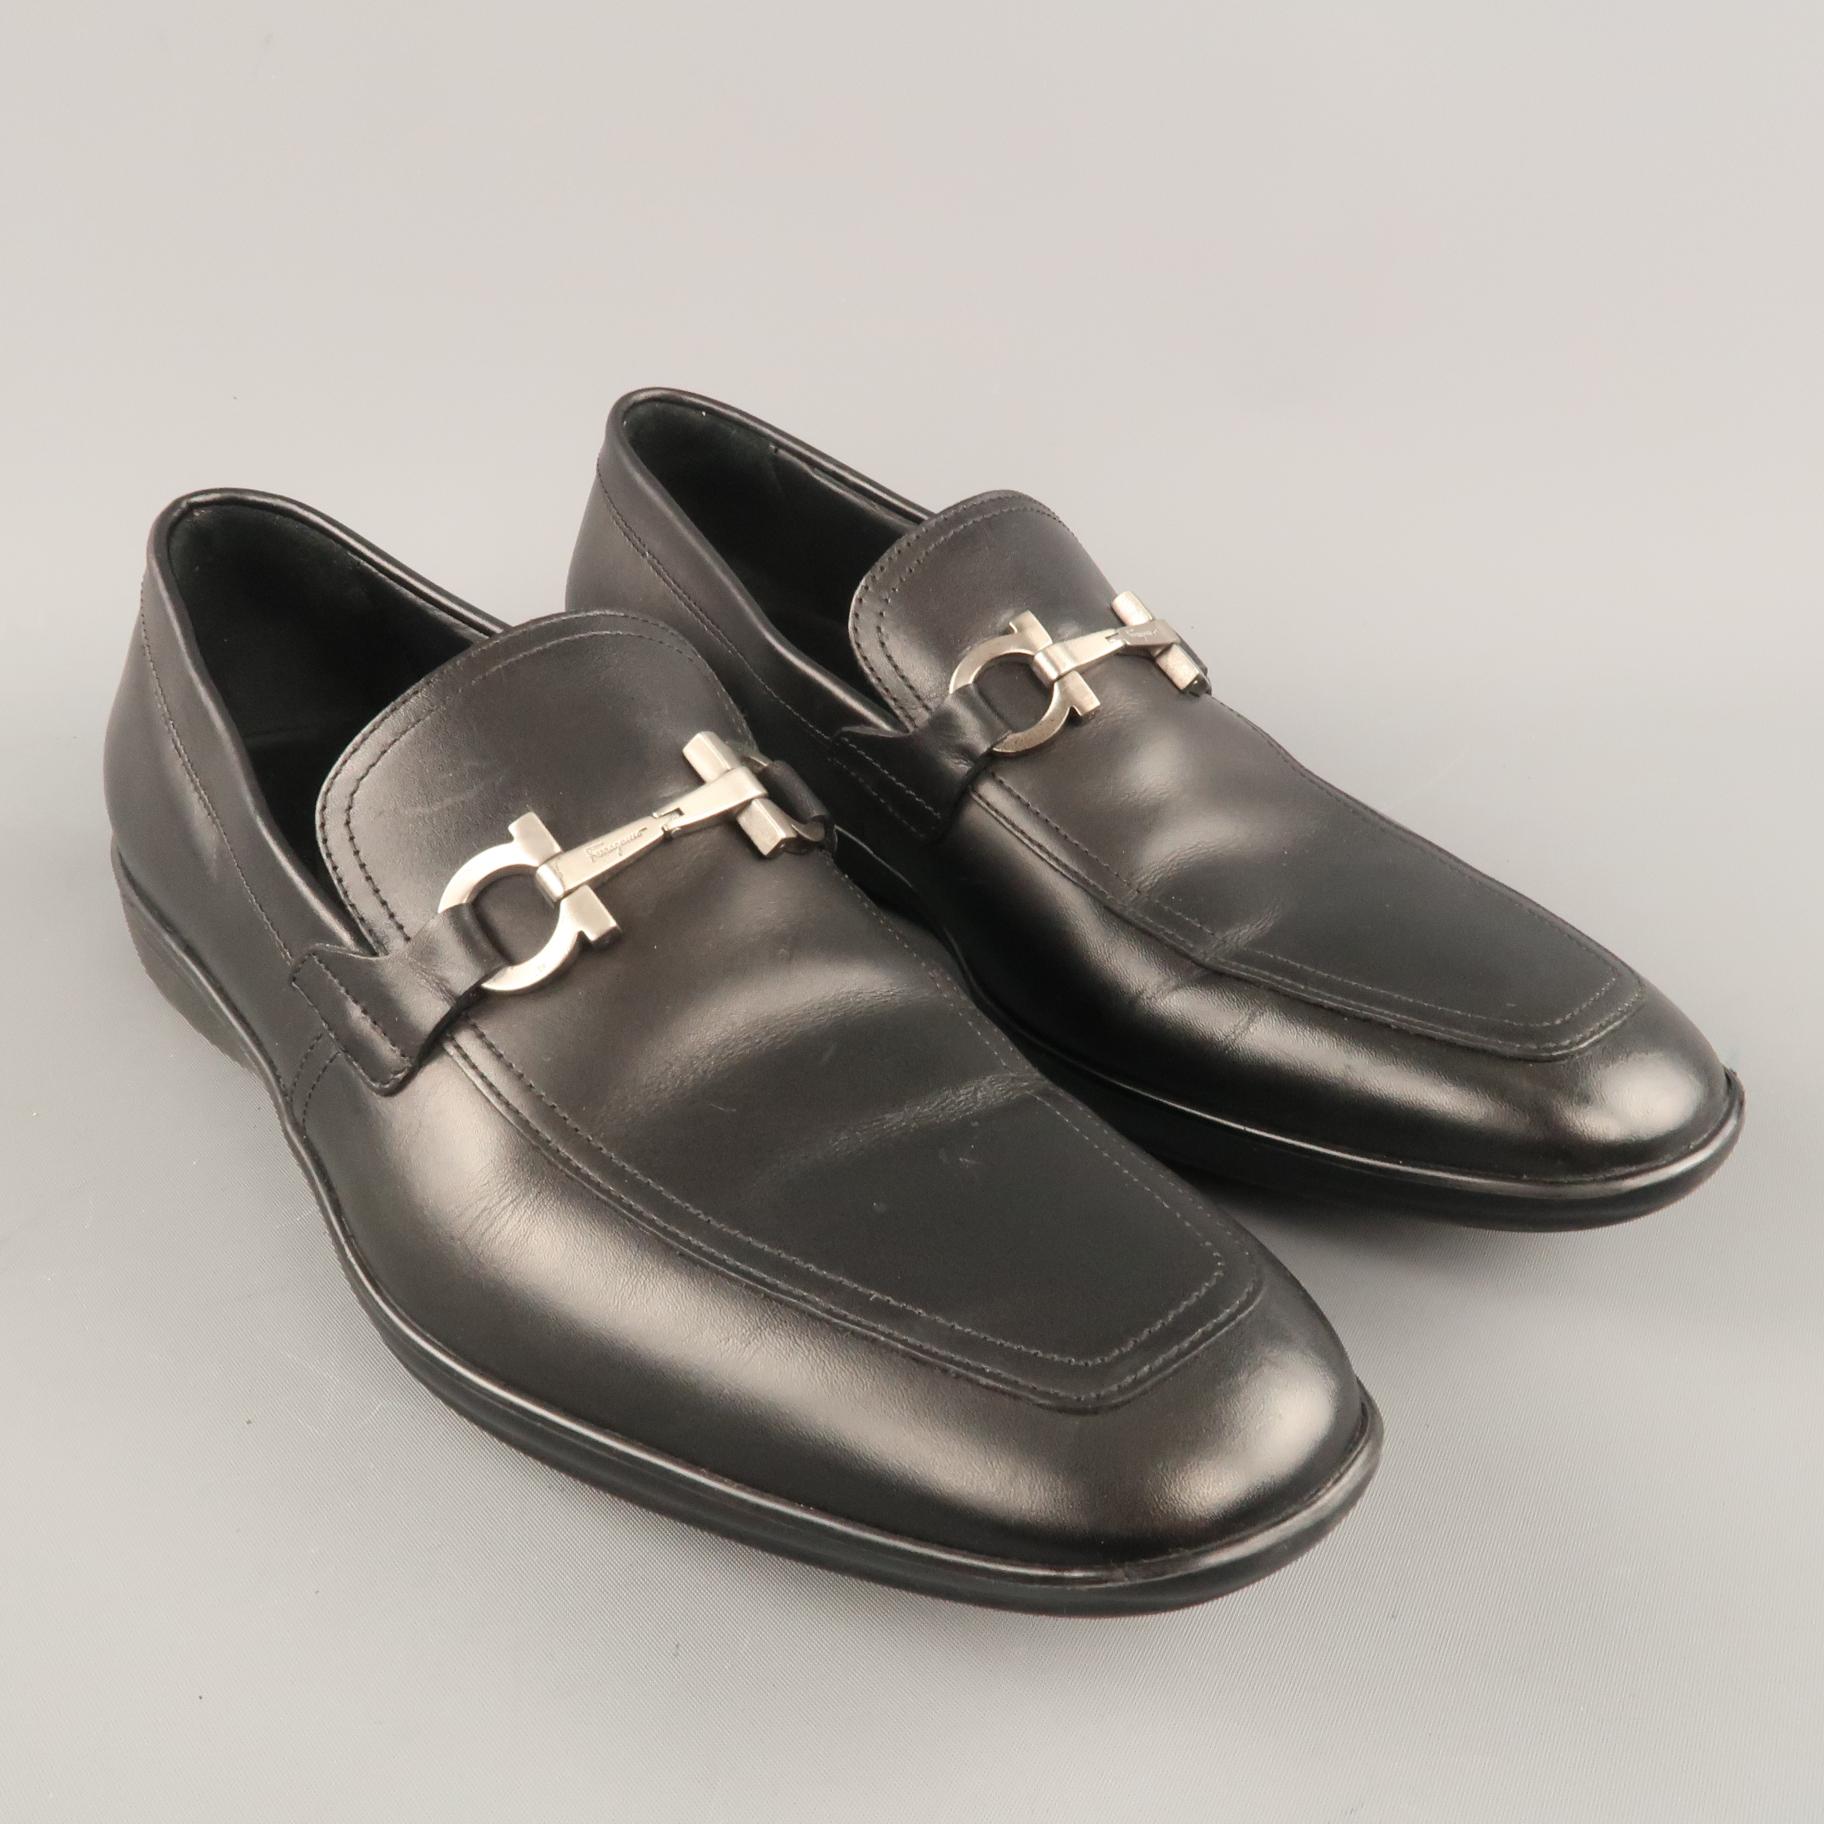 SALVATORE FERRAGAMO loafers come in black leather with an apron toe, rubber sole, and matte silver tone metal Gancini hardware. Made in Italy.
 
Excellent Pre-Owned Condition.
Marked: UK 7 1/2
 
Outsole: 11.5 x 3.75 in.